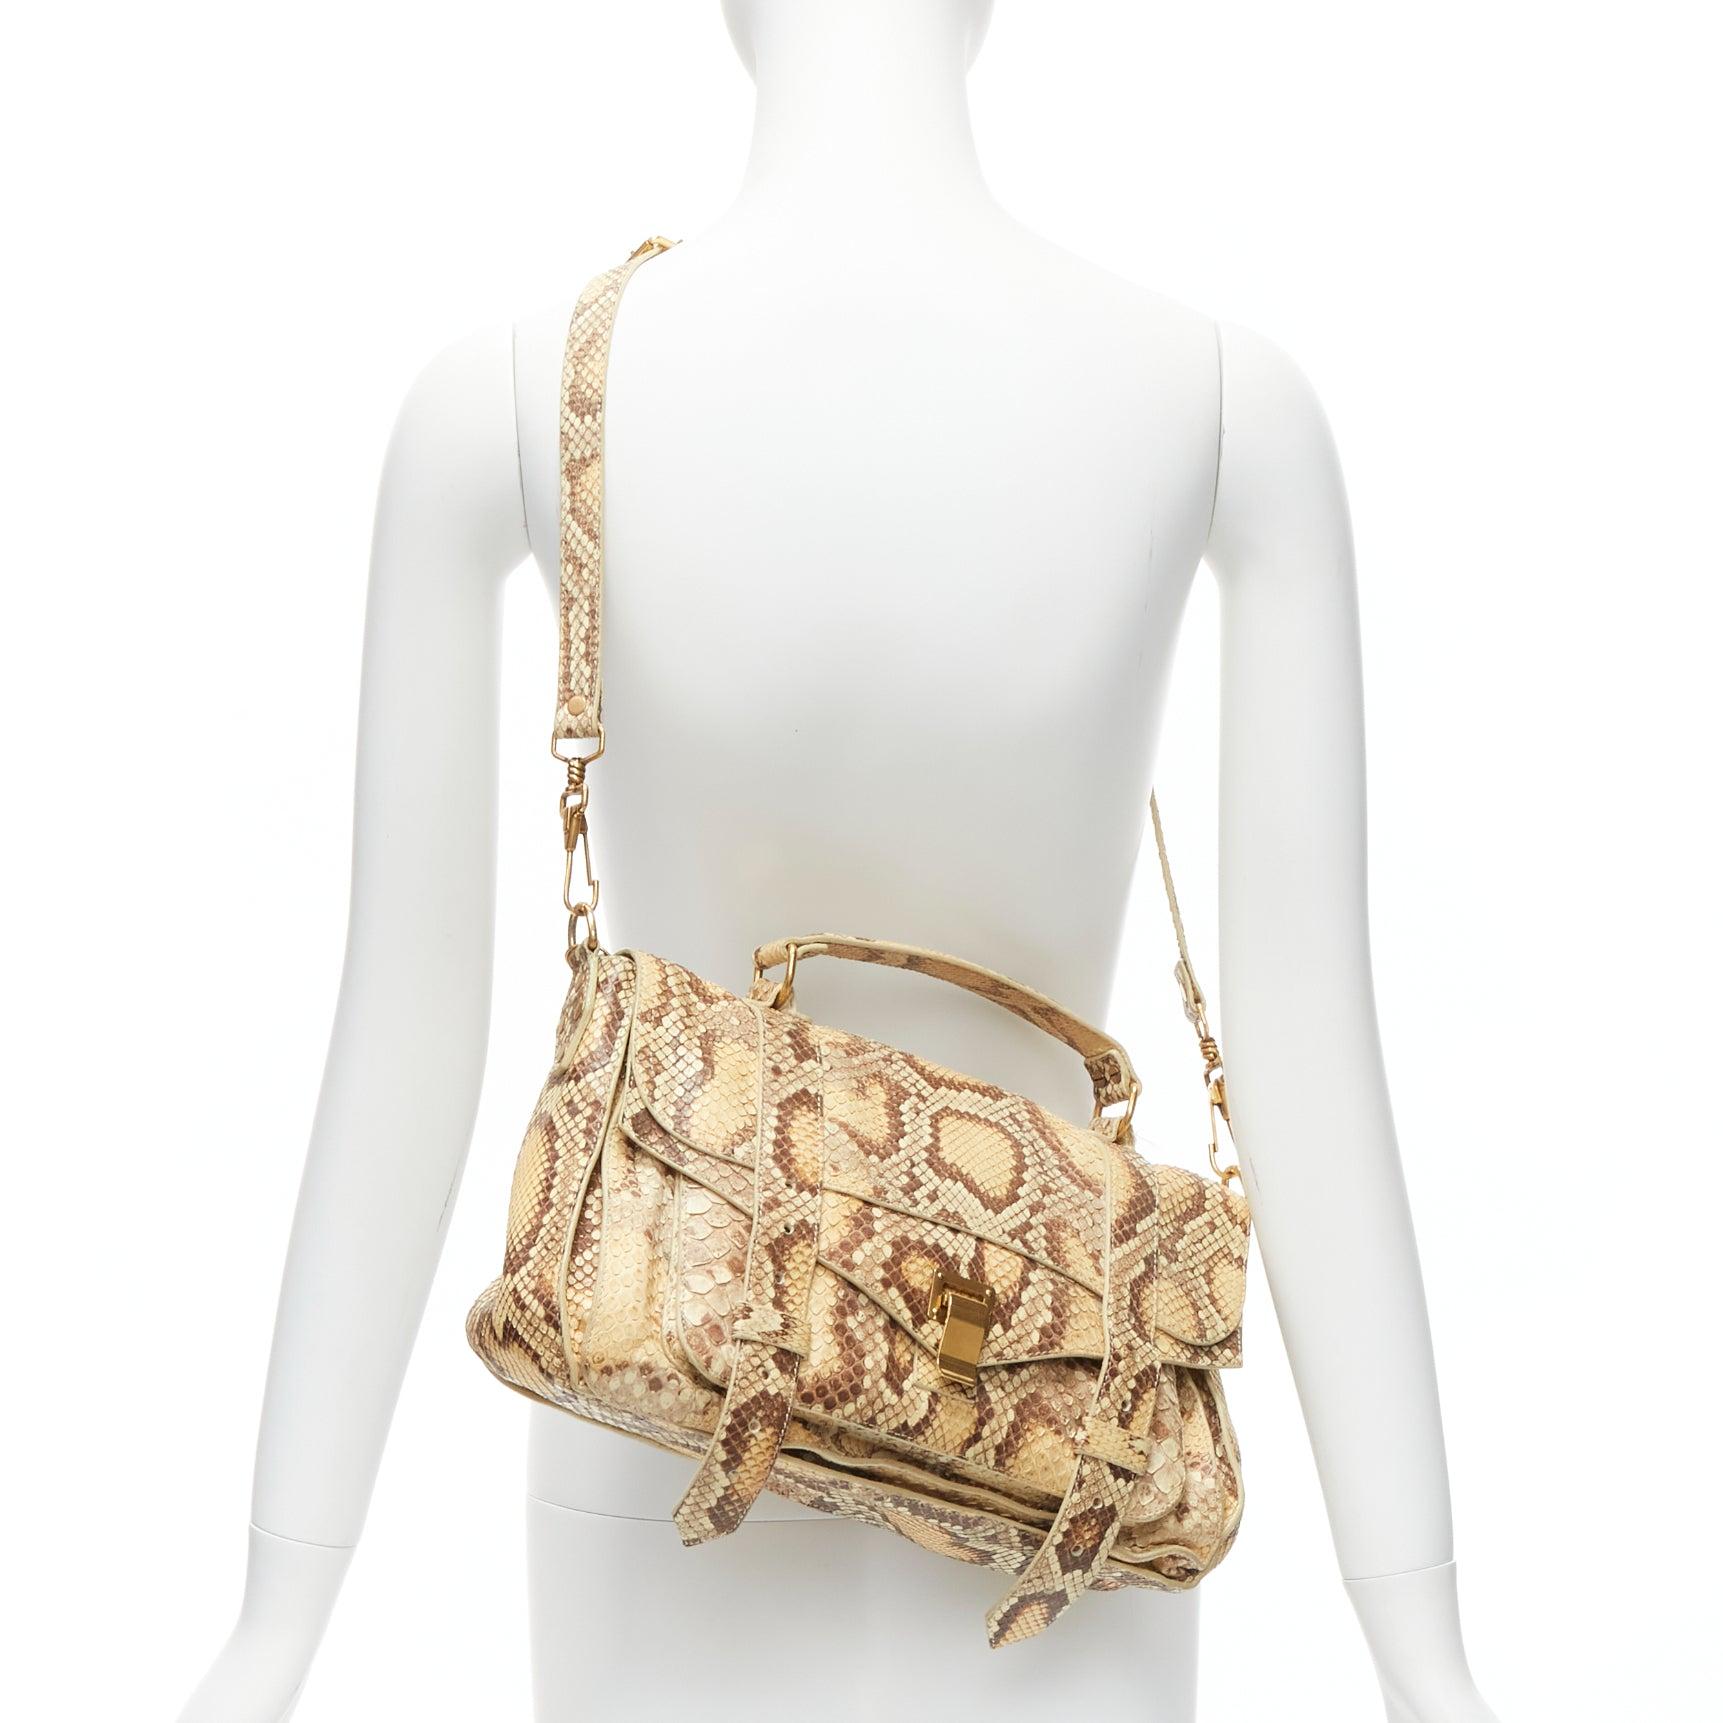 PROENZA SCHOULER PS1 beige scaled leather satchel crossbody shoulder bag
Reference: CNPG/A00023
Brand: Proenza Schouler
Model: PS1
Material: Leather
Color: Beige
Pattern: Animal Print
Closure: Clasp
Lining: Black Fabric
Extra Details: Logo plate on